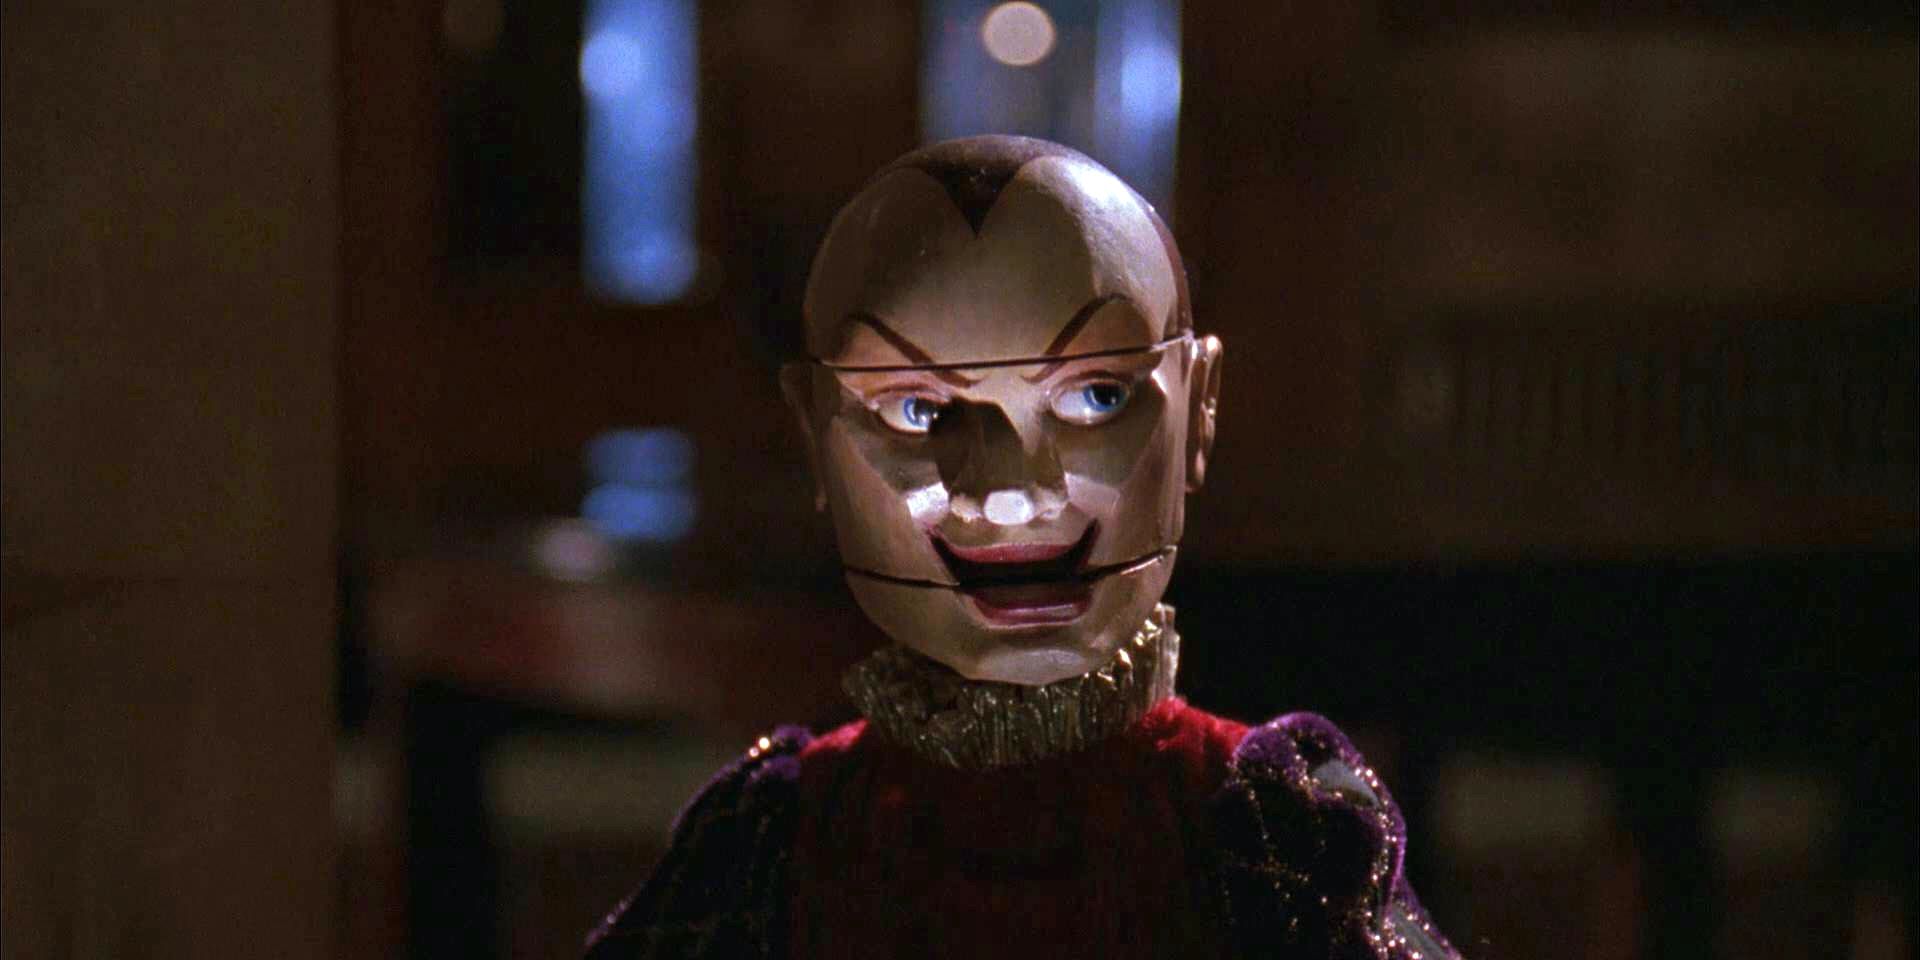 Jester looking creepy from Puppet Master